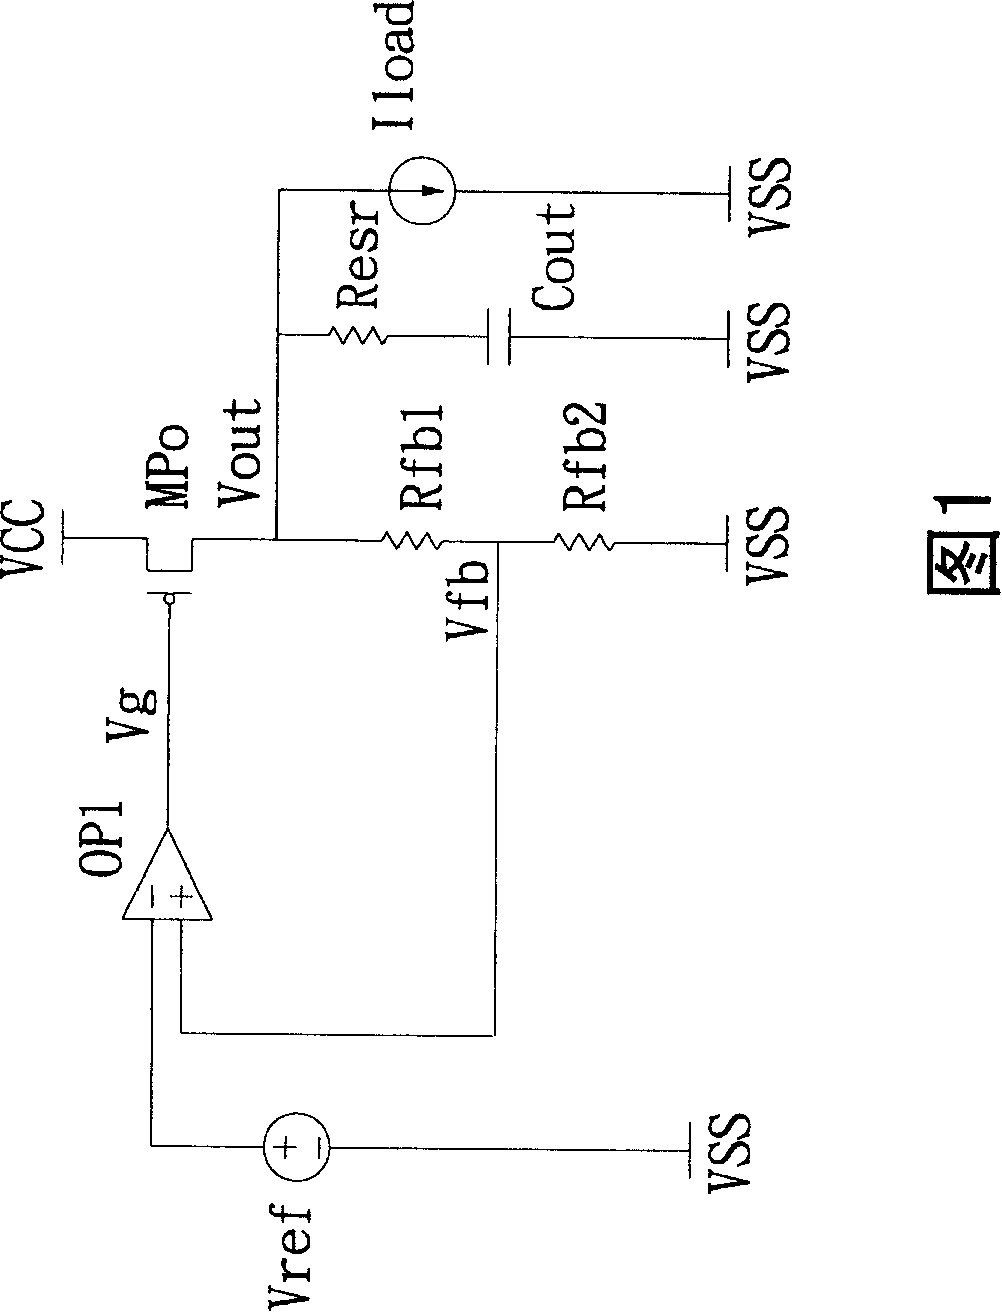 Voltage stabilizer comprising accelerated return for output